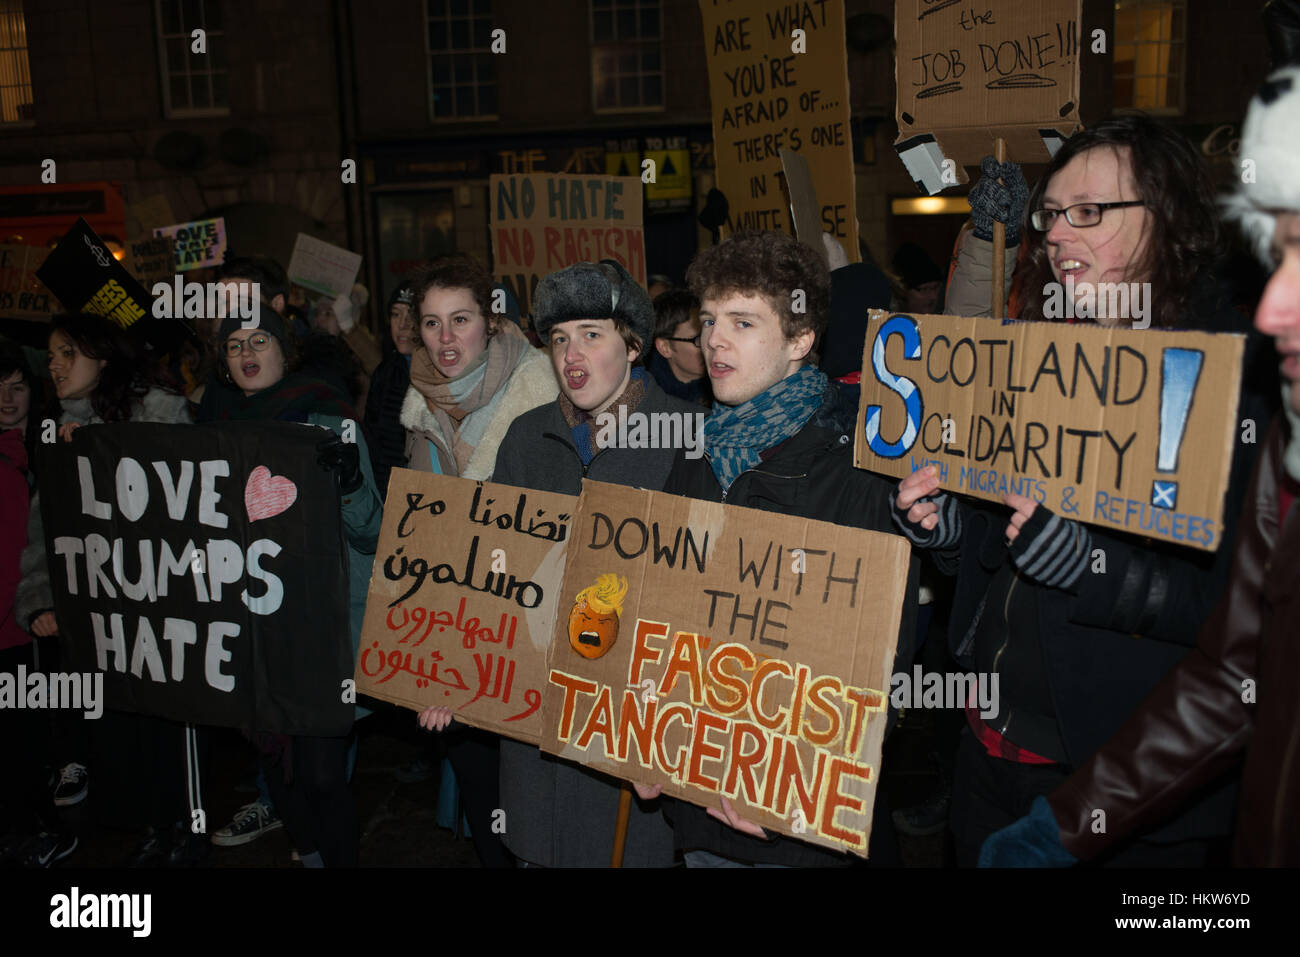 Aberdeen, UK. 30th January, 2017. Anti-Trump travel ban protest attracts hundreds of people in central Aberdeen, Scotland. Credit: Paul Glendell/Alamy Live News Stock Photo